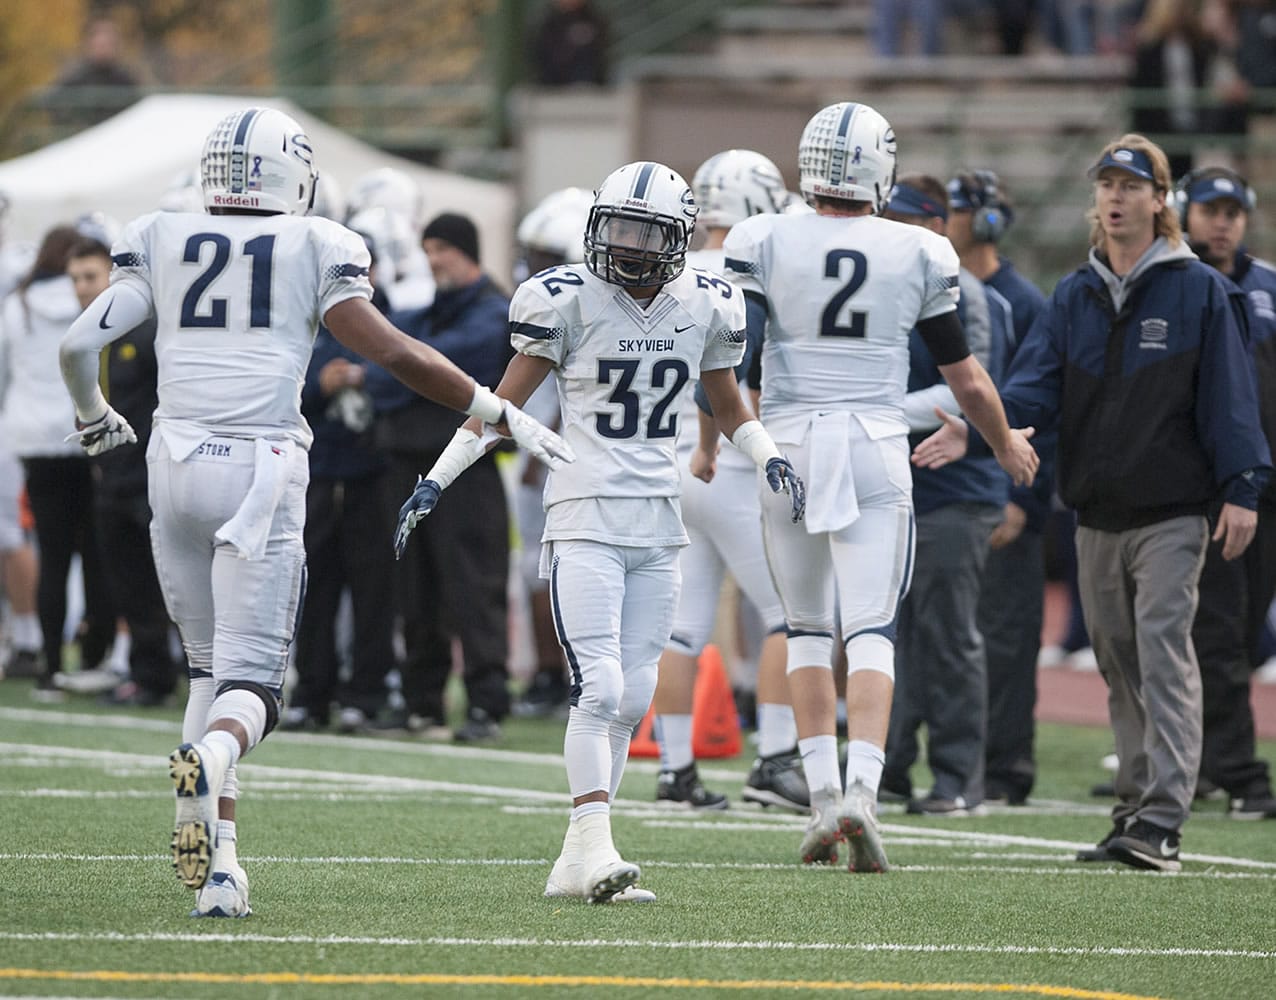 Skyview's Jeremiah Wright (21) celebrates his second quarter touchdown with teammate Tavis Chunphakvenn-Pinkney (32) on Friday. Skyview, Battle Ground and Mountain View will play a tiebreaker Monday to decide two postseason berths.